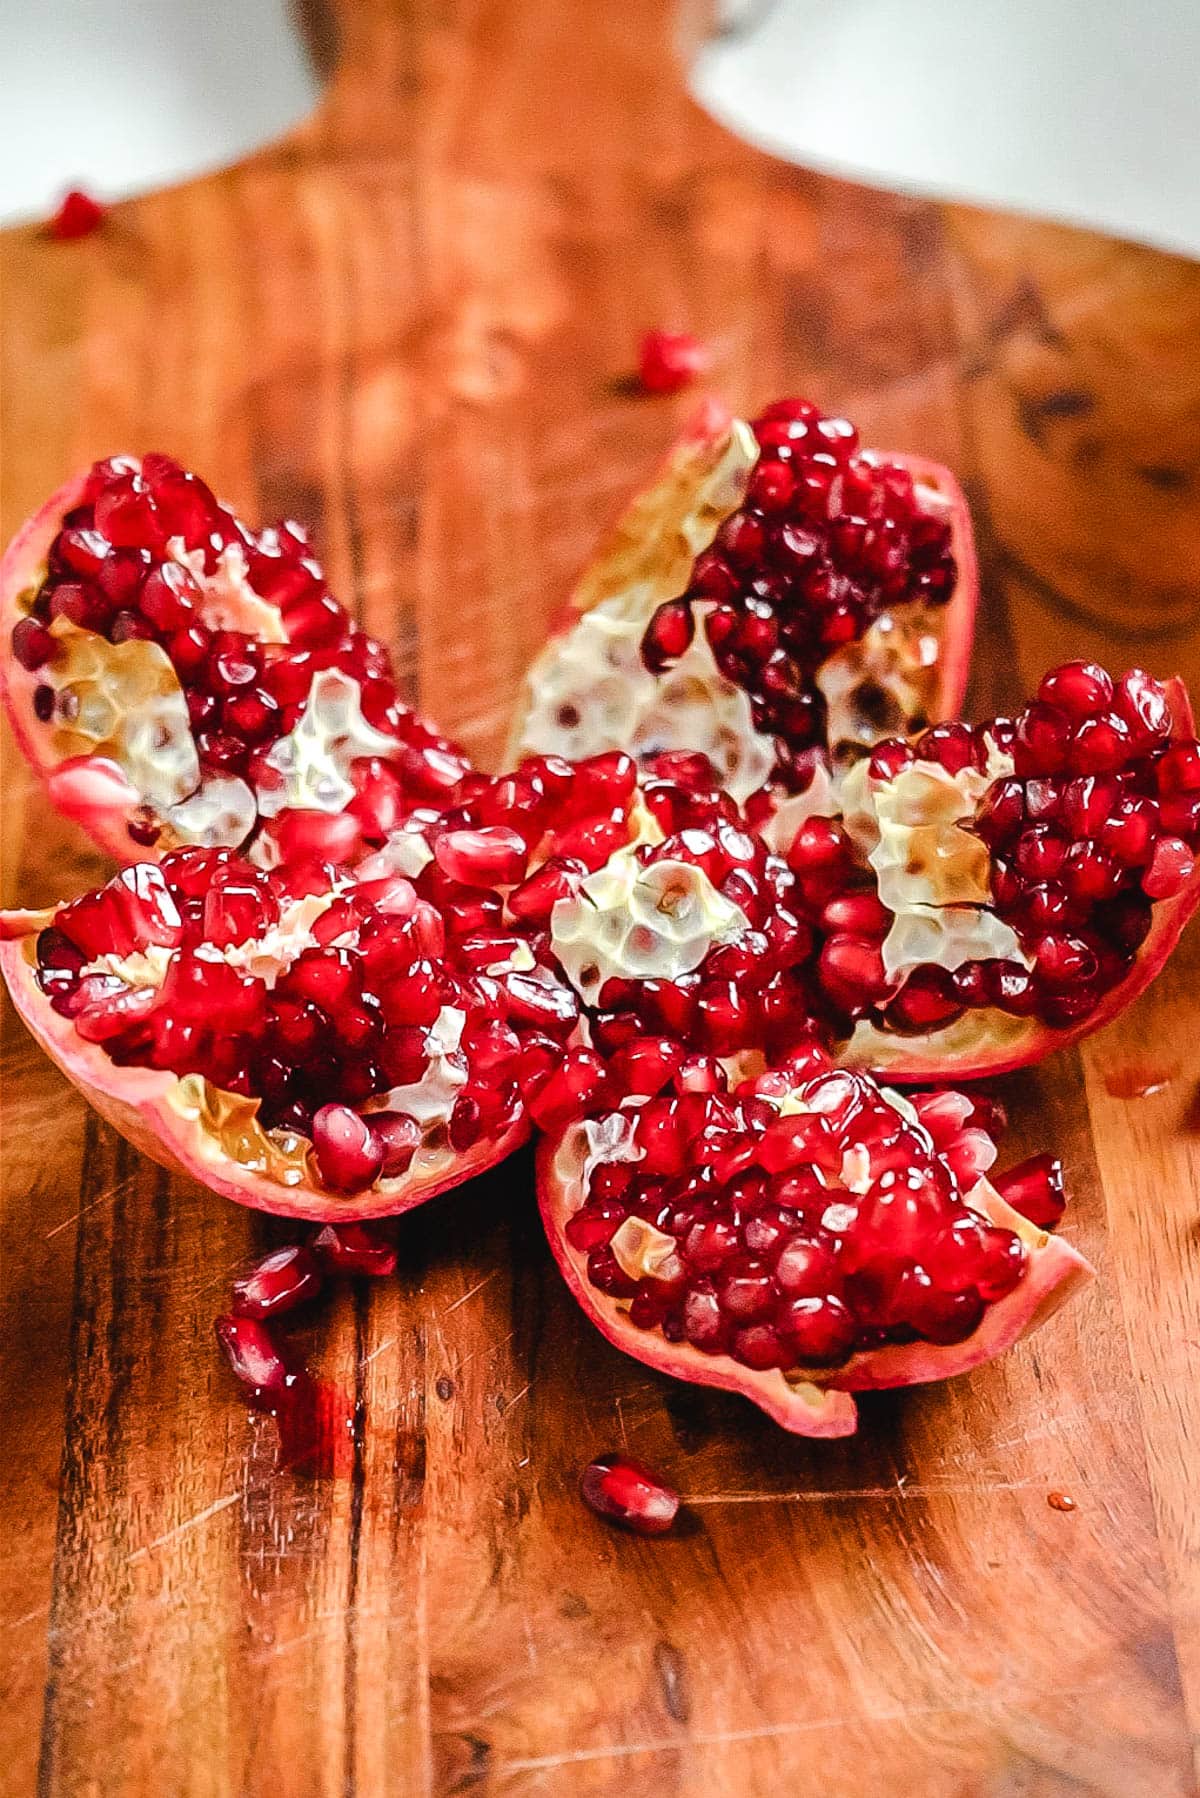 An open pomegranate with segments intact and the seeds exposed